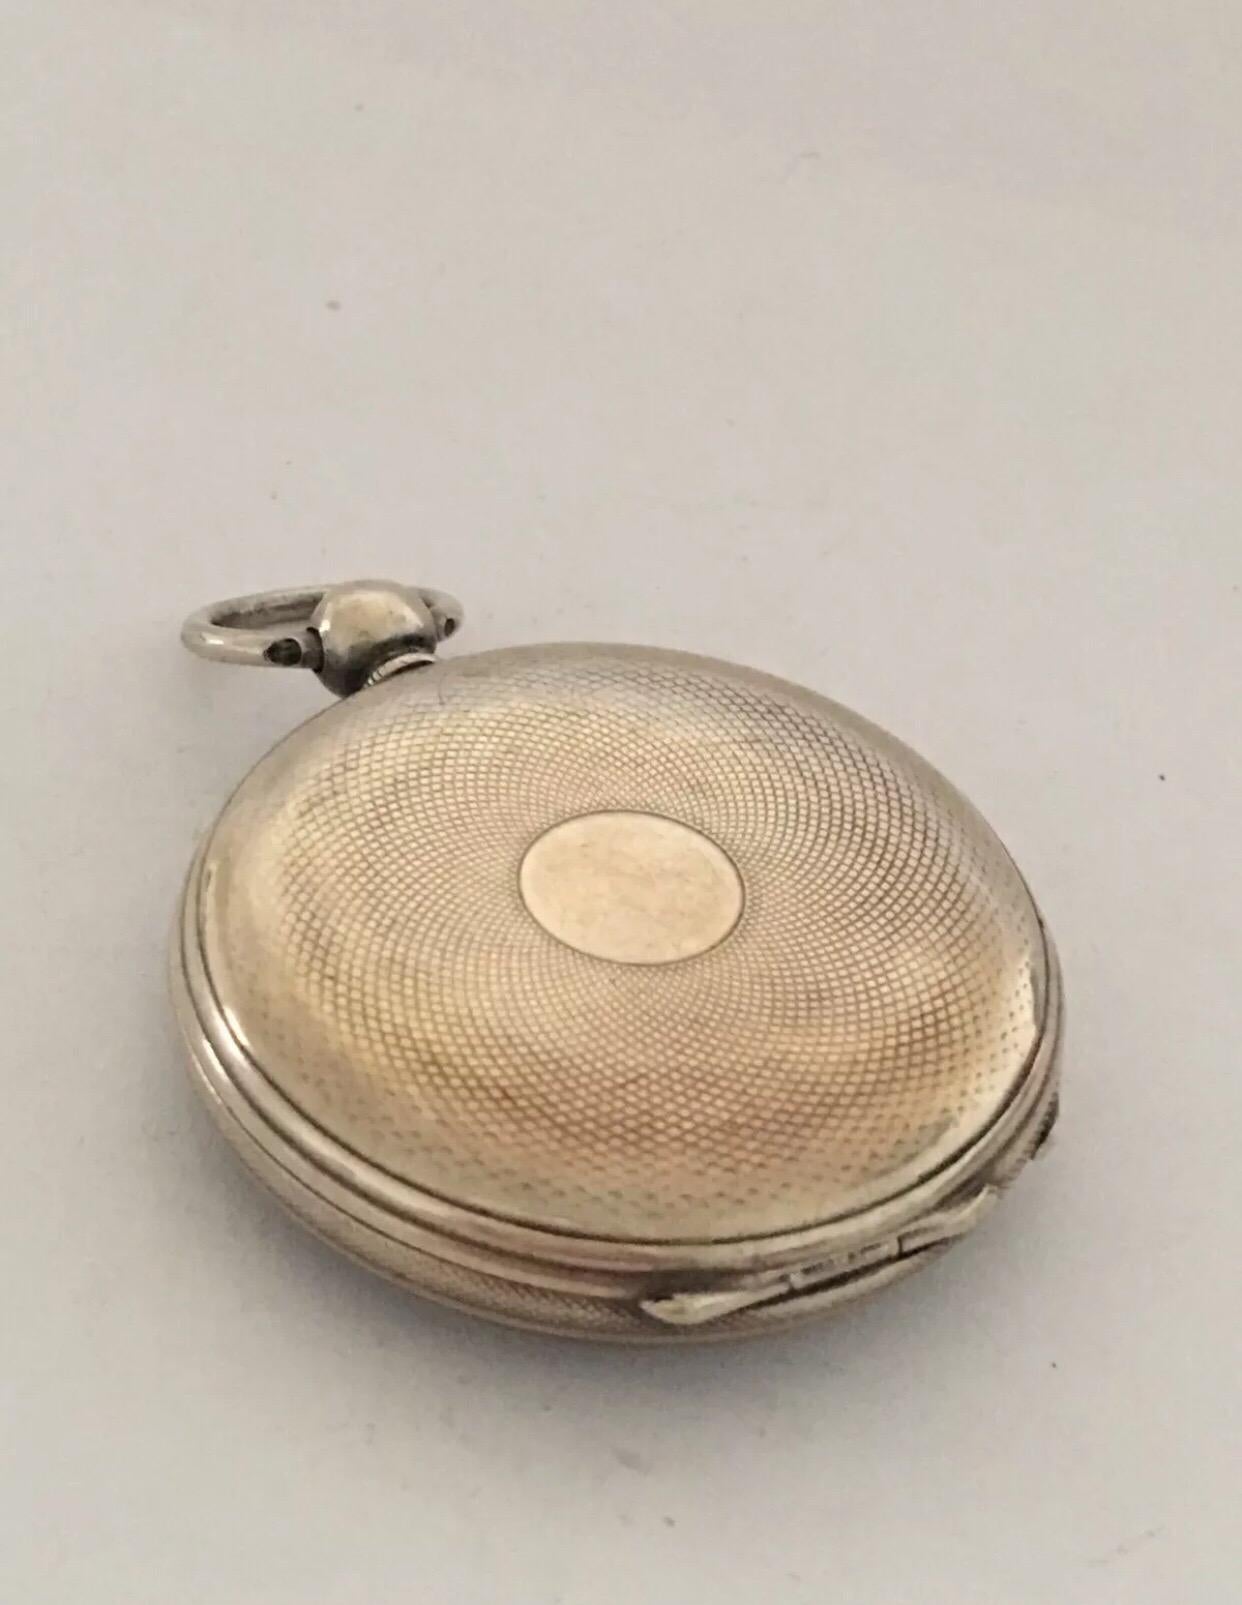 Antique Silver Key-wind Pocket Watch With Silver Dial.

This watch is working and ticking well. It comes with a key